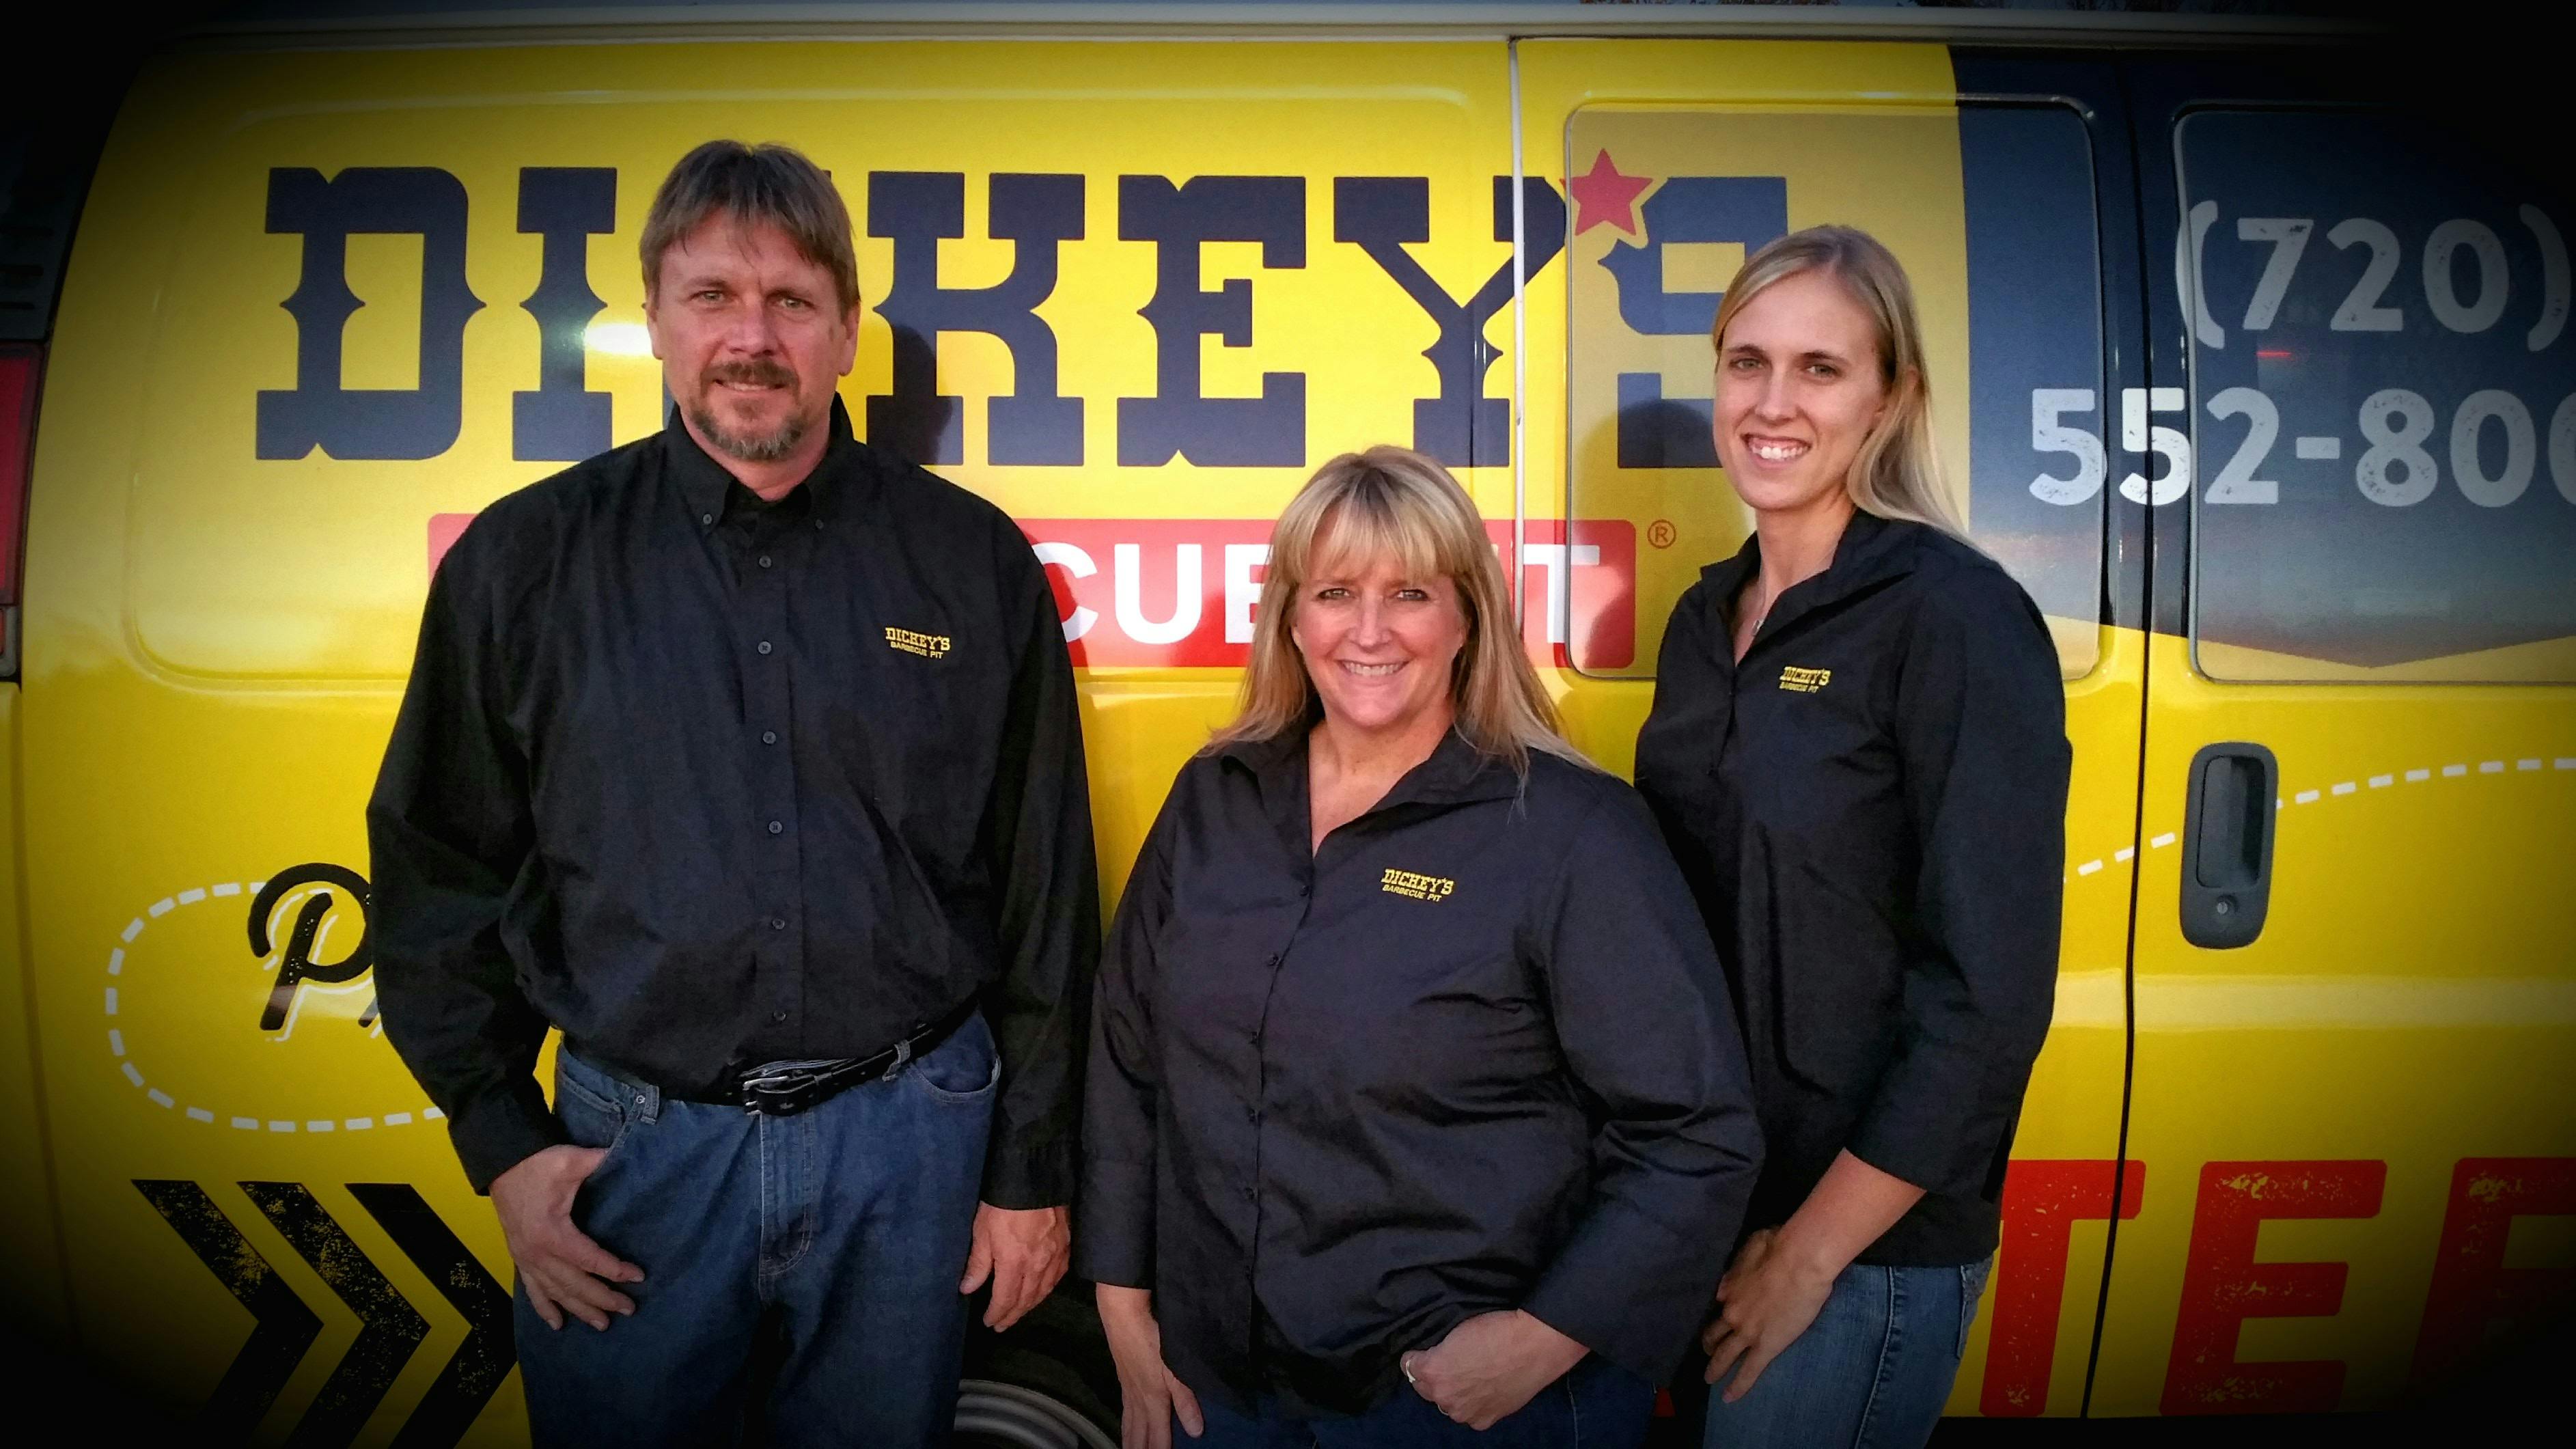 Local Longmont Family Opens Dickey’s Barbecue Pit In Their Hometown